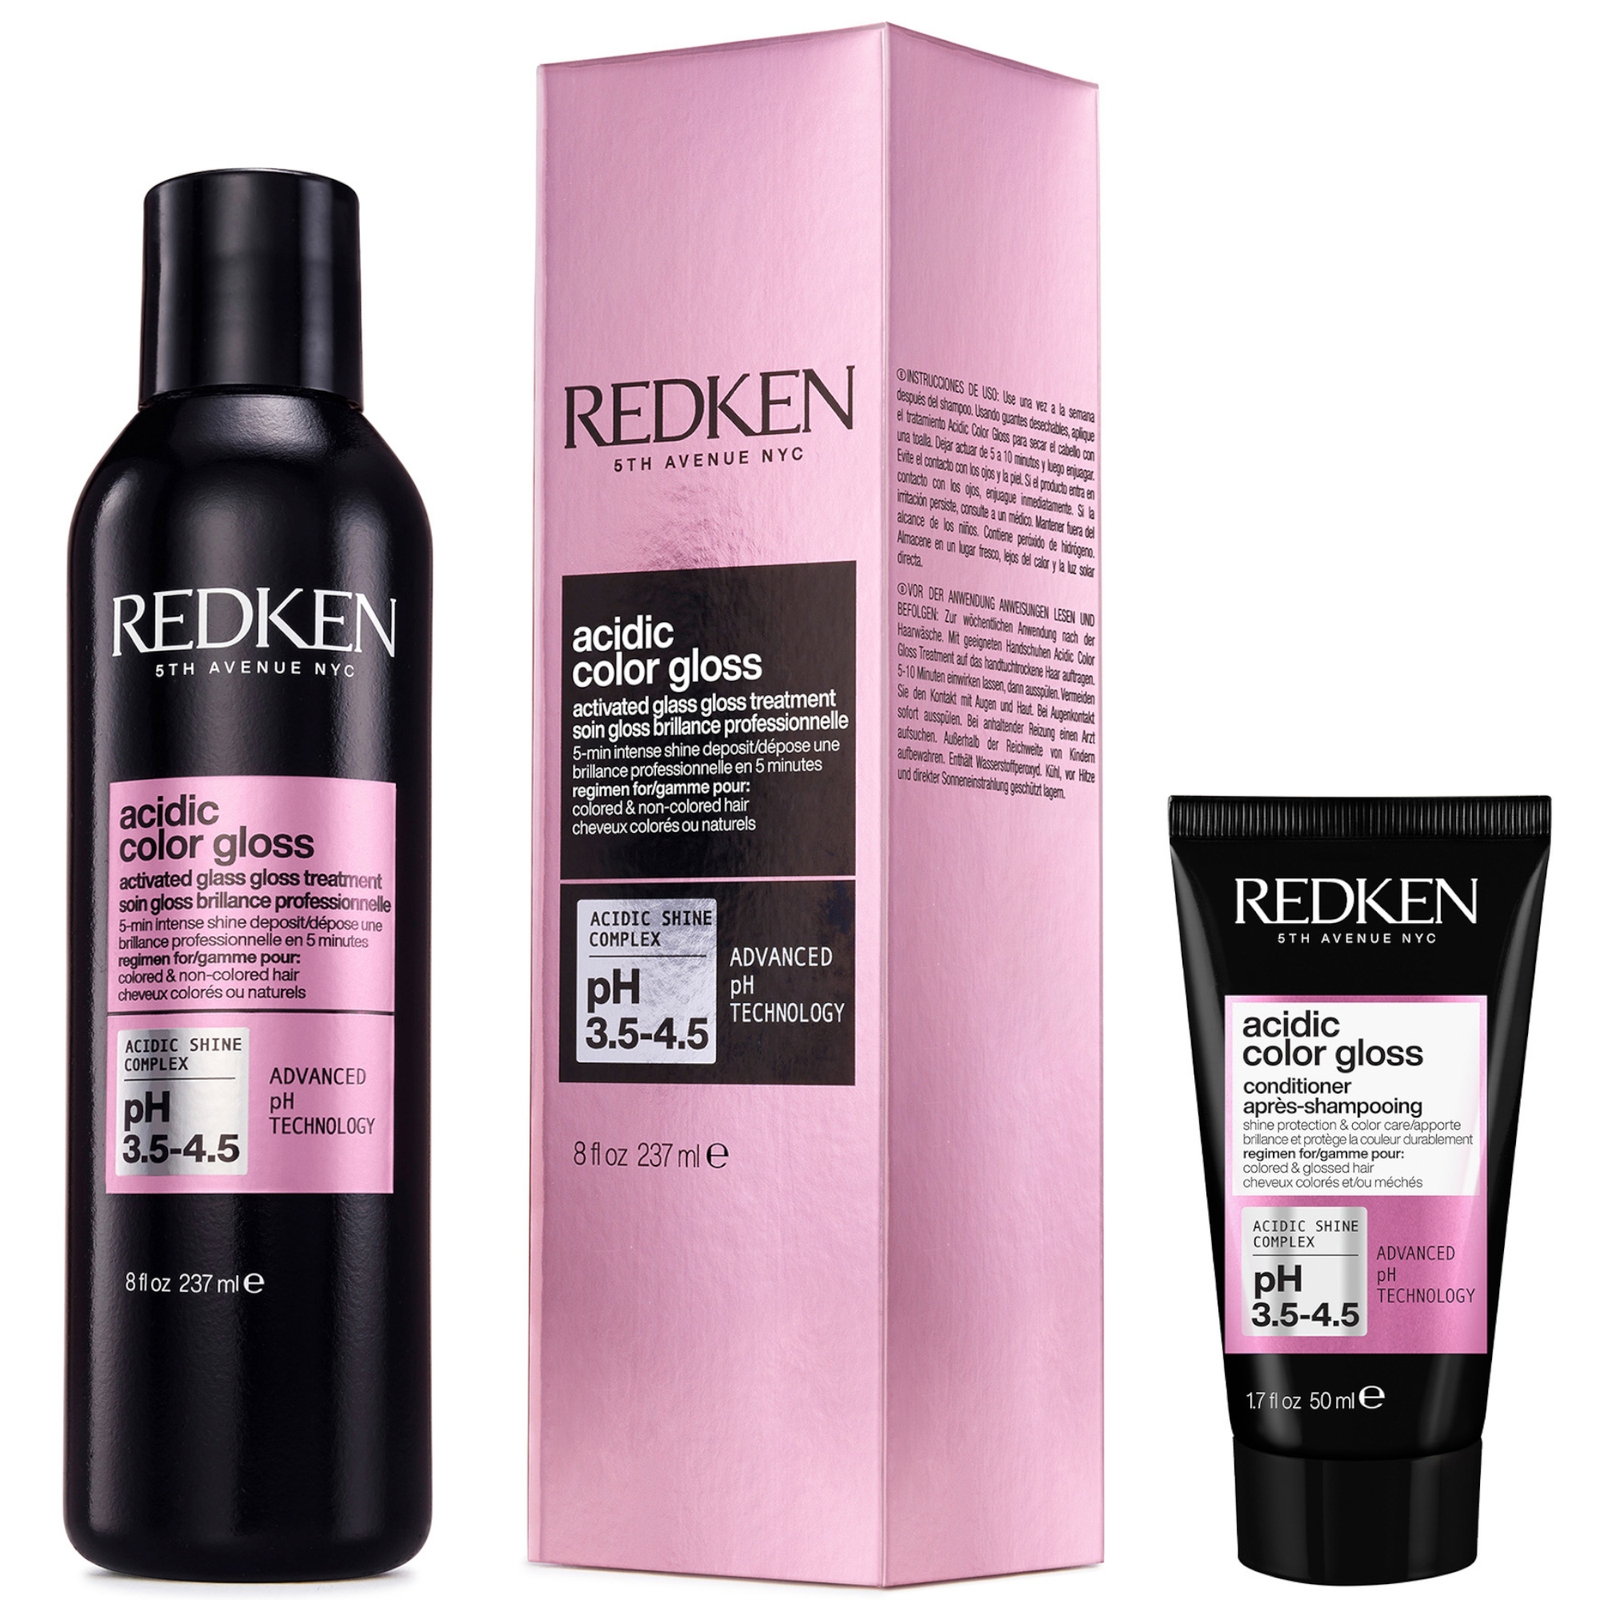 Redken Acidic Color Gloss Activated Glass Gloss Treatment 237ml and Conditioner Mini 50ml, Glass-Lik